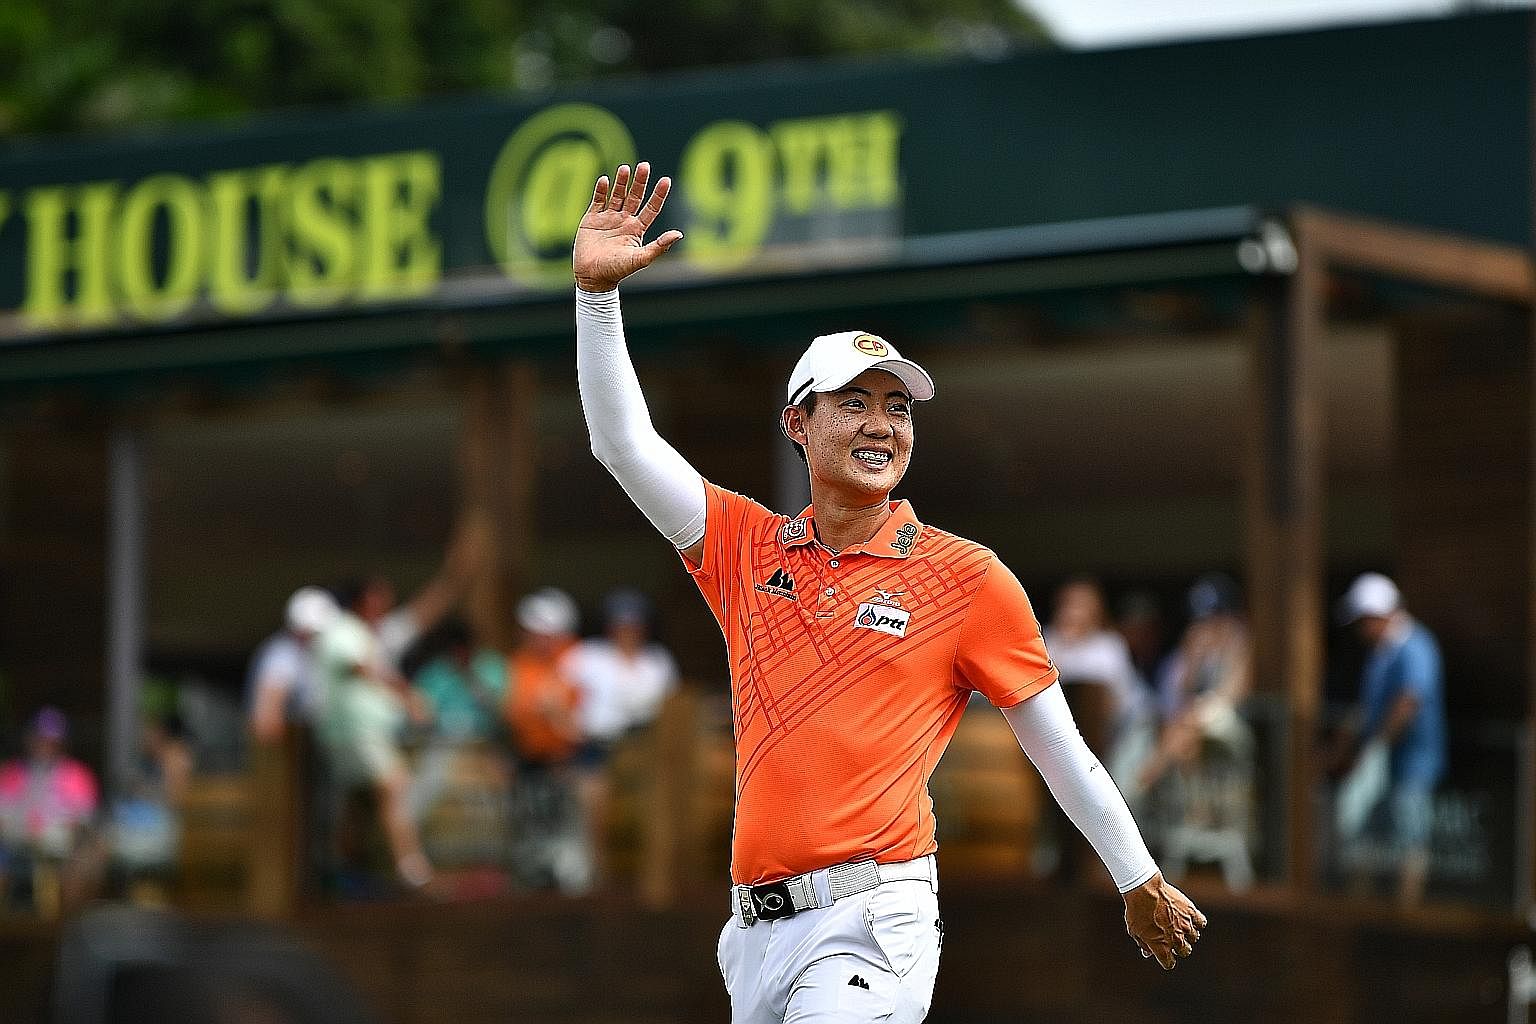 Thai golfer Jazz Janewattananond won the SMBC Singapore Open yesterday in the biggest triumph of his career. The 23-year-old fired a six-under 65 in the final round at Sentosa Golf Club's Serapong Course for an 18-under 266 total, two shots ahead of 